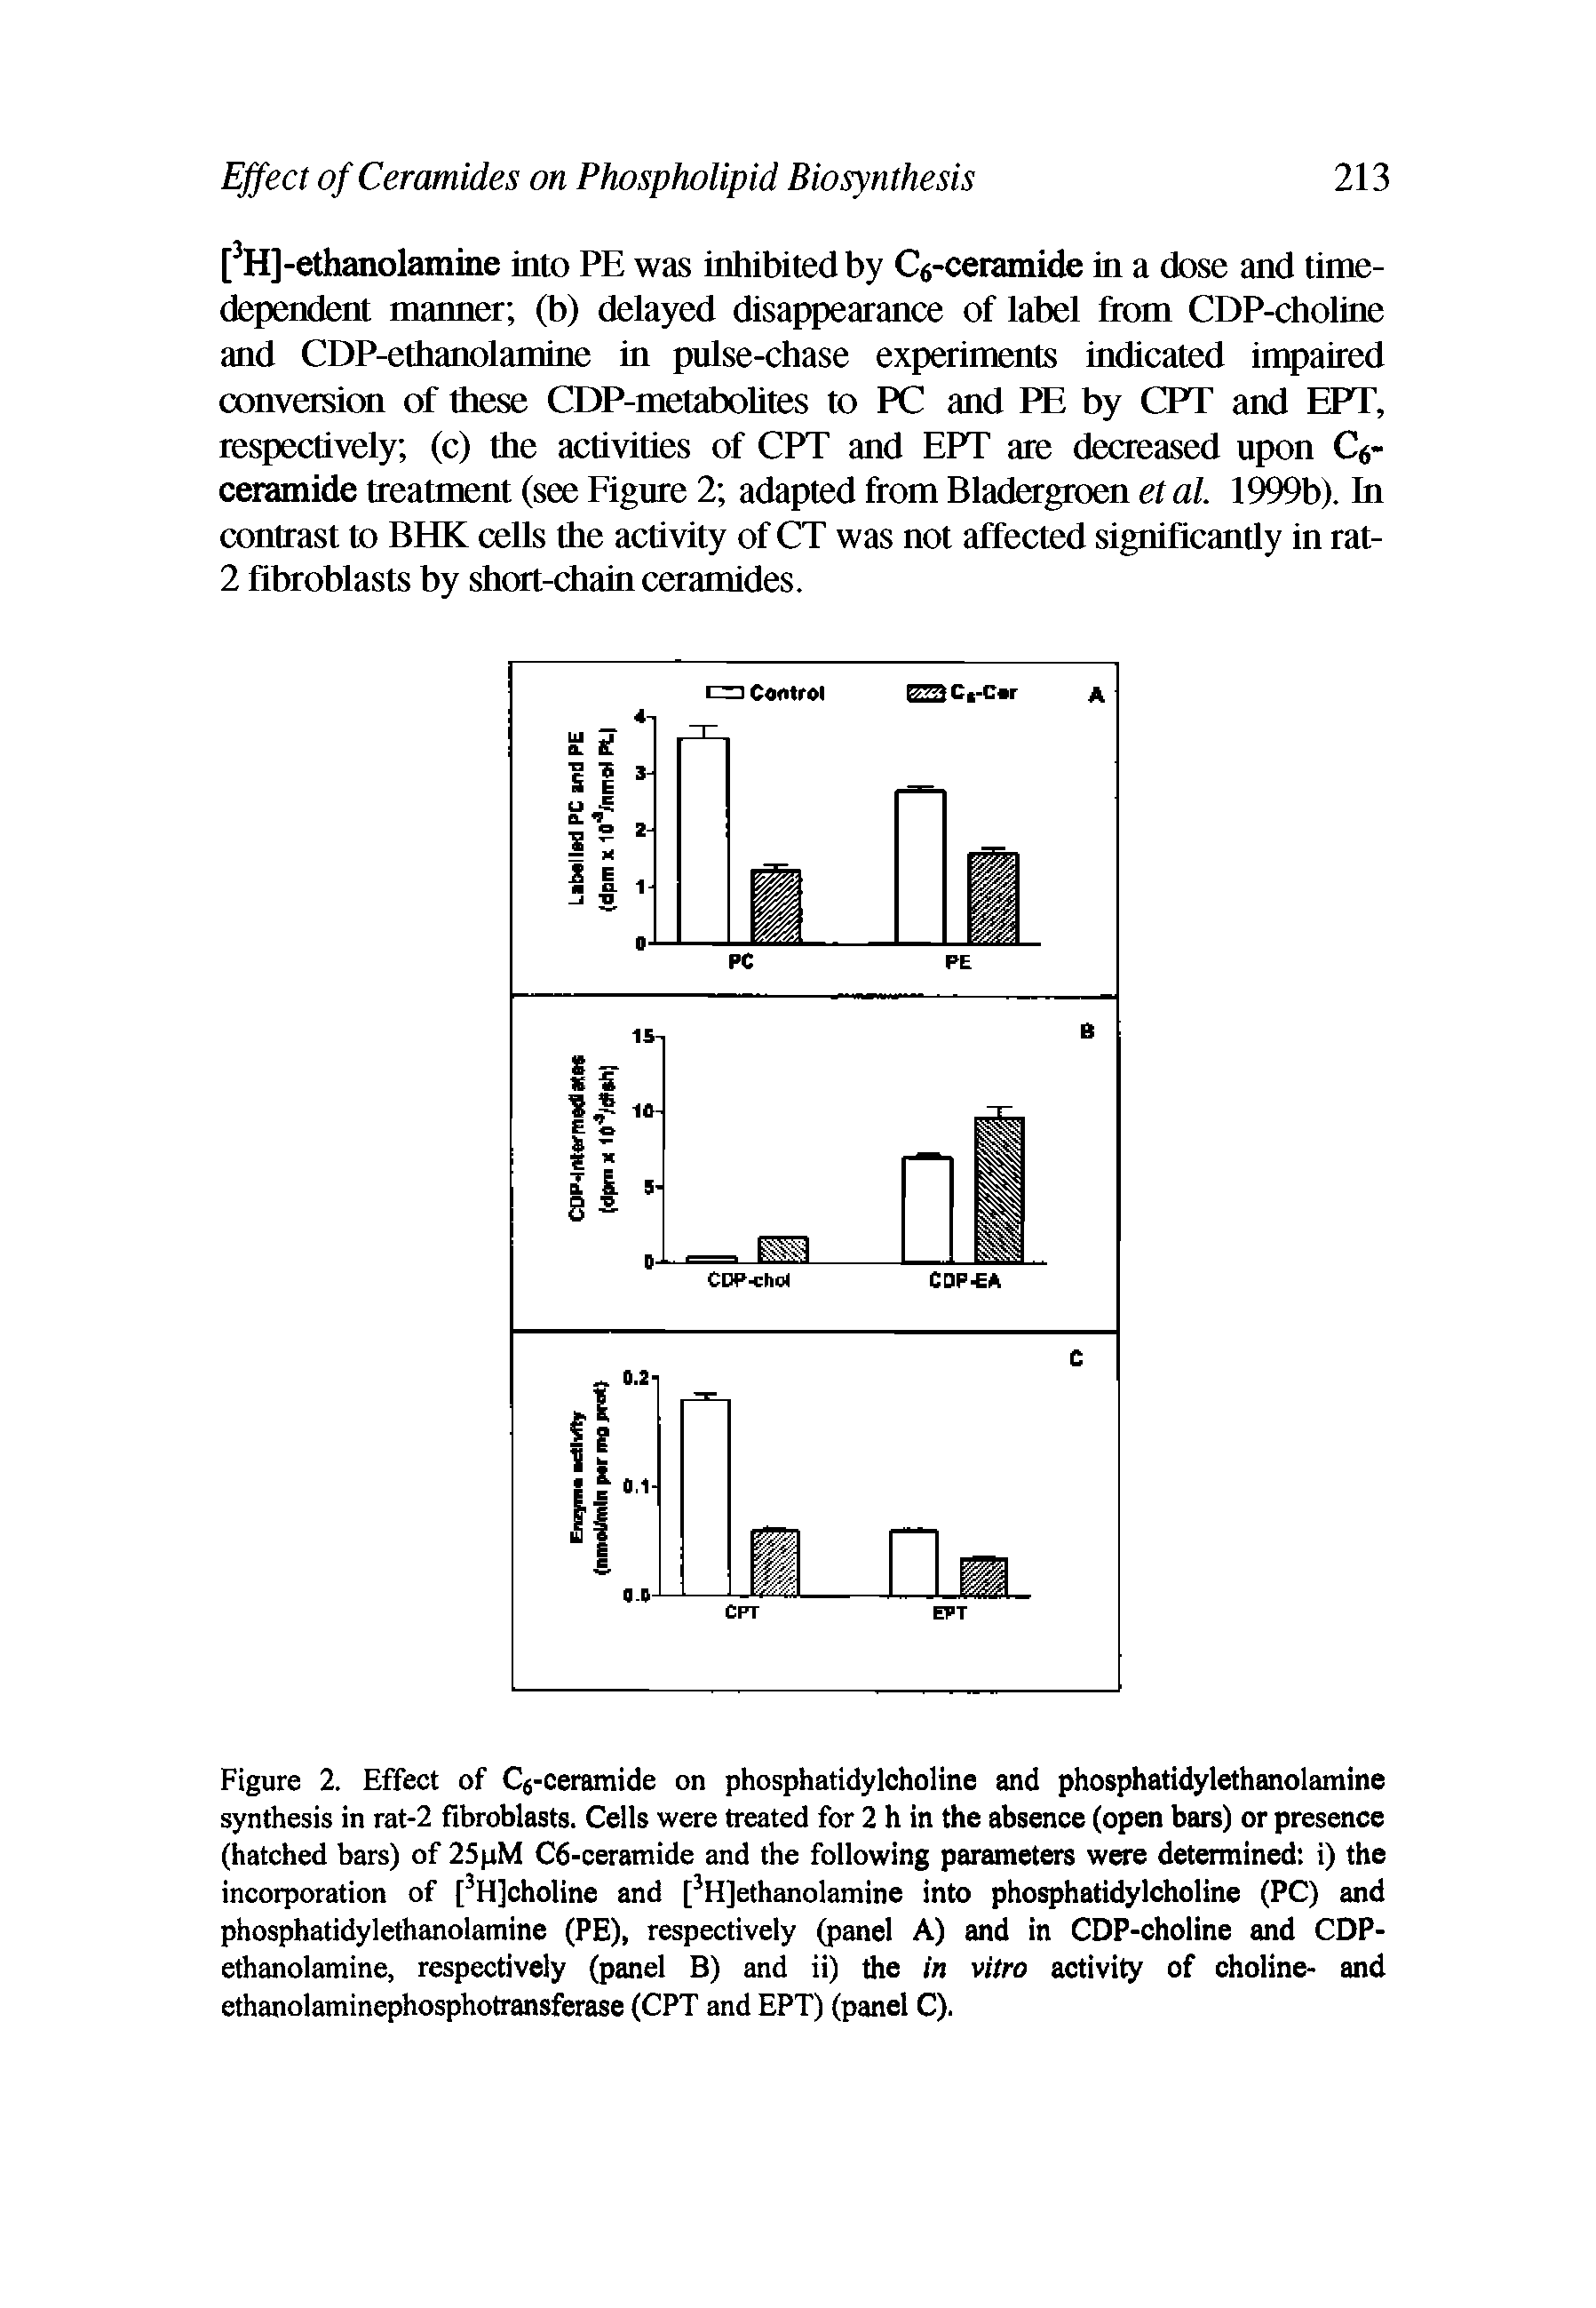 Figure 2. Effect of Ca-ceramide on phosphatidylcholine and phosphatidylethanolamine synthesis in rat-2 fibroblasts. Cells were treated for 2 h in the absence (open bars) or presence (hatched bars) of 25pM C6-ceramide and the following parameters were determined i) the incorporation of [ H]choline and [ H]ethanolamine into phosphatidylcholine (PC) and phosphatidylethanolamine (PE), respectively (panel A) and in CDP-choline and CDP-ethanolamine, respectively (panel B) and ii) the in vitro activity of choline- and ethanolaminephosphotransferase (CPT and EPT) (panel C).